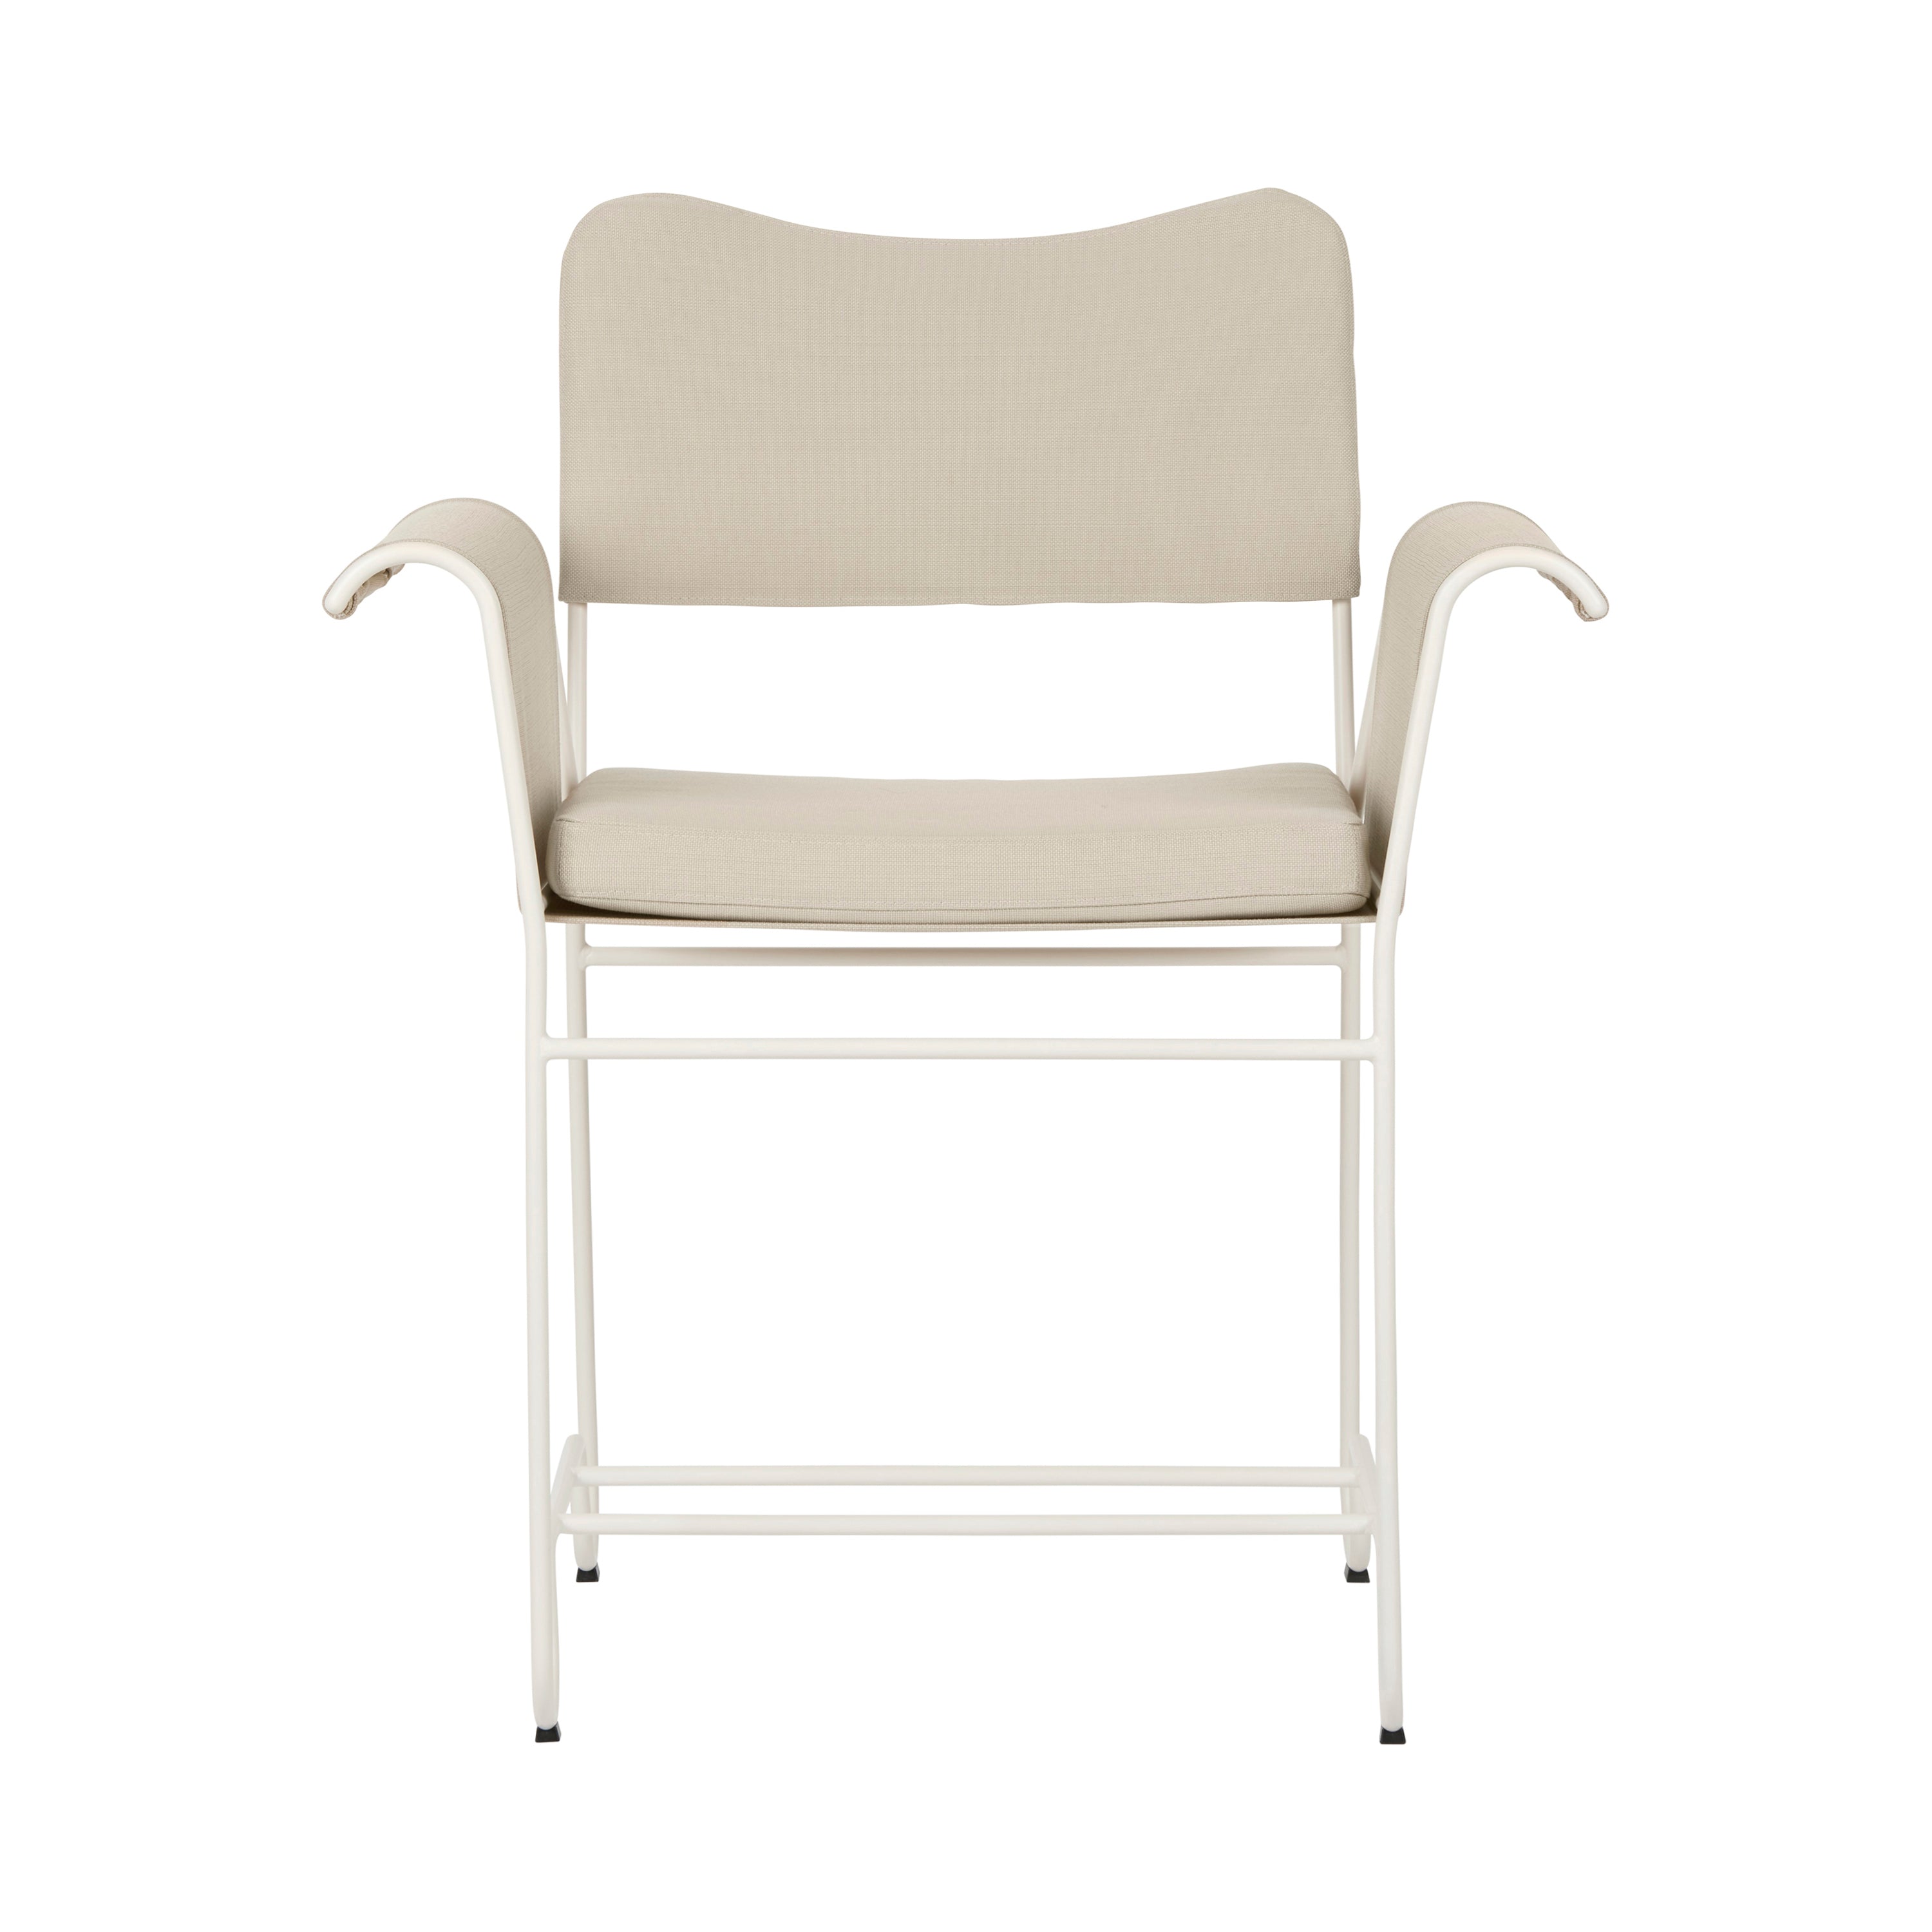 Tropique Dining Chair: Outdoor + Without Fringes + White Semi Matt + Leslie 12